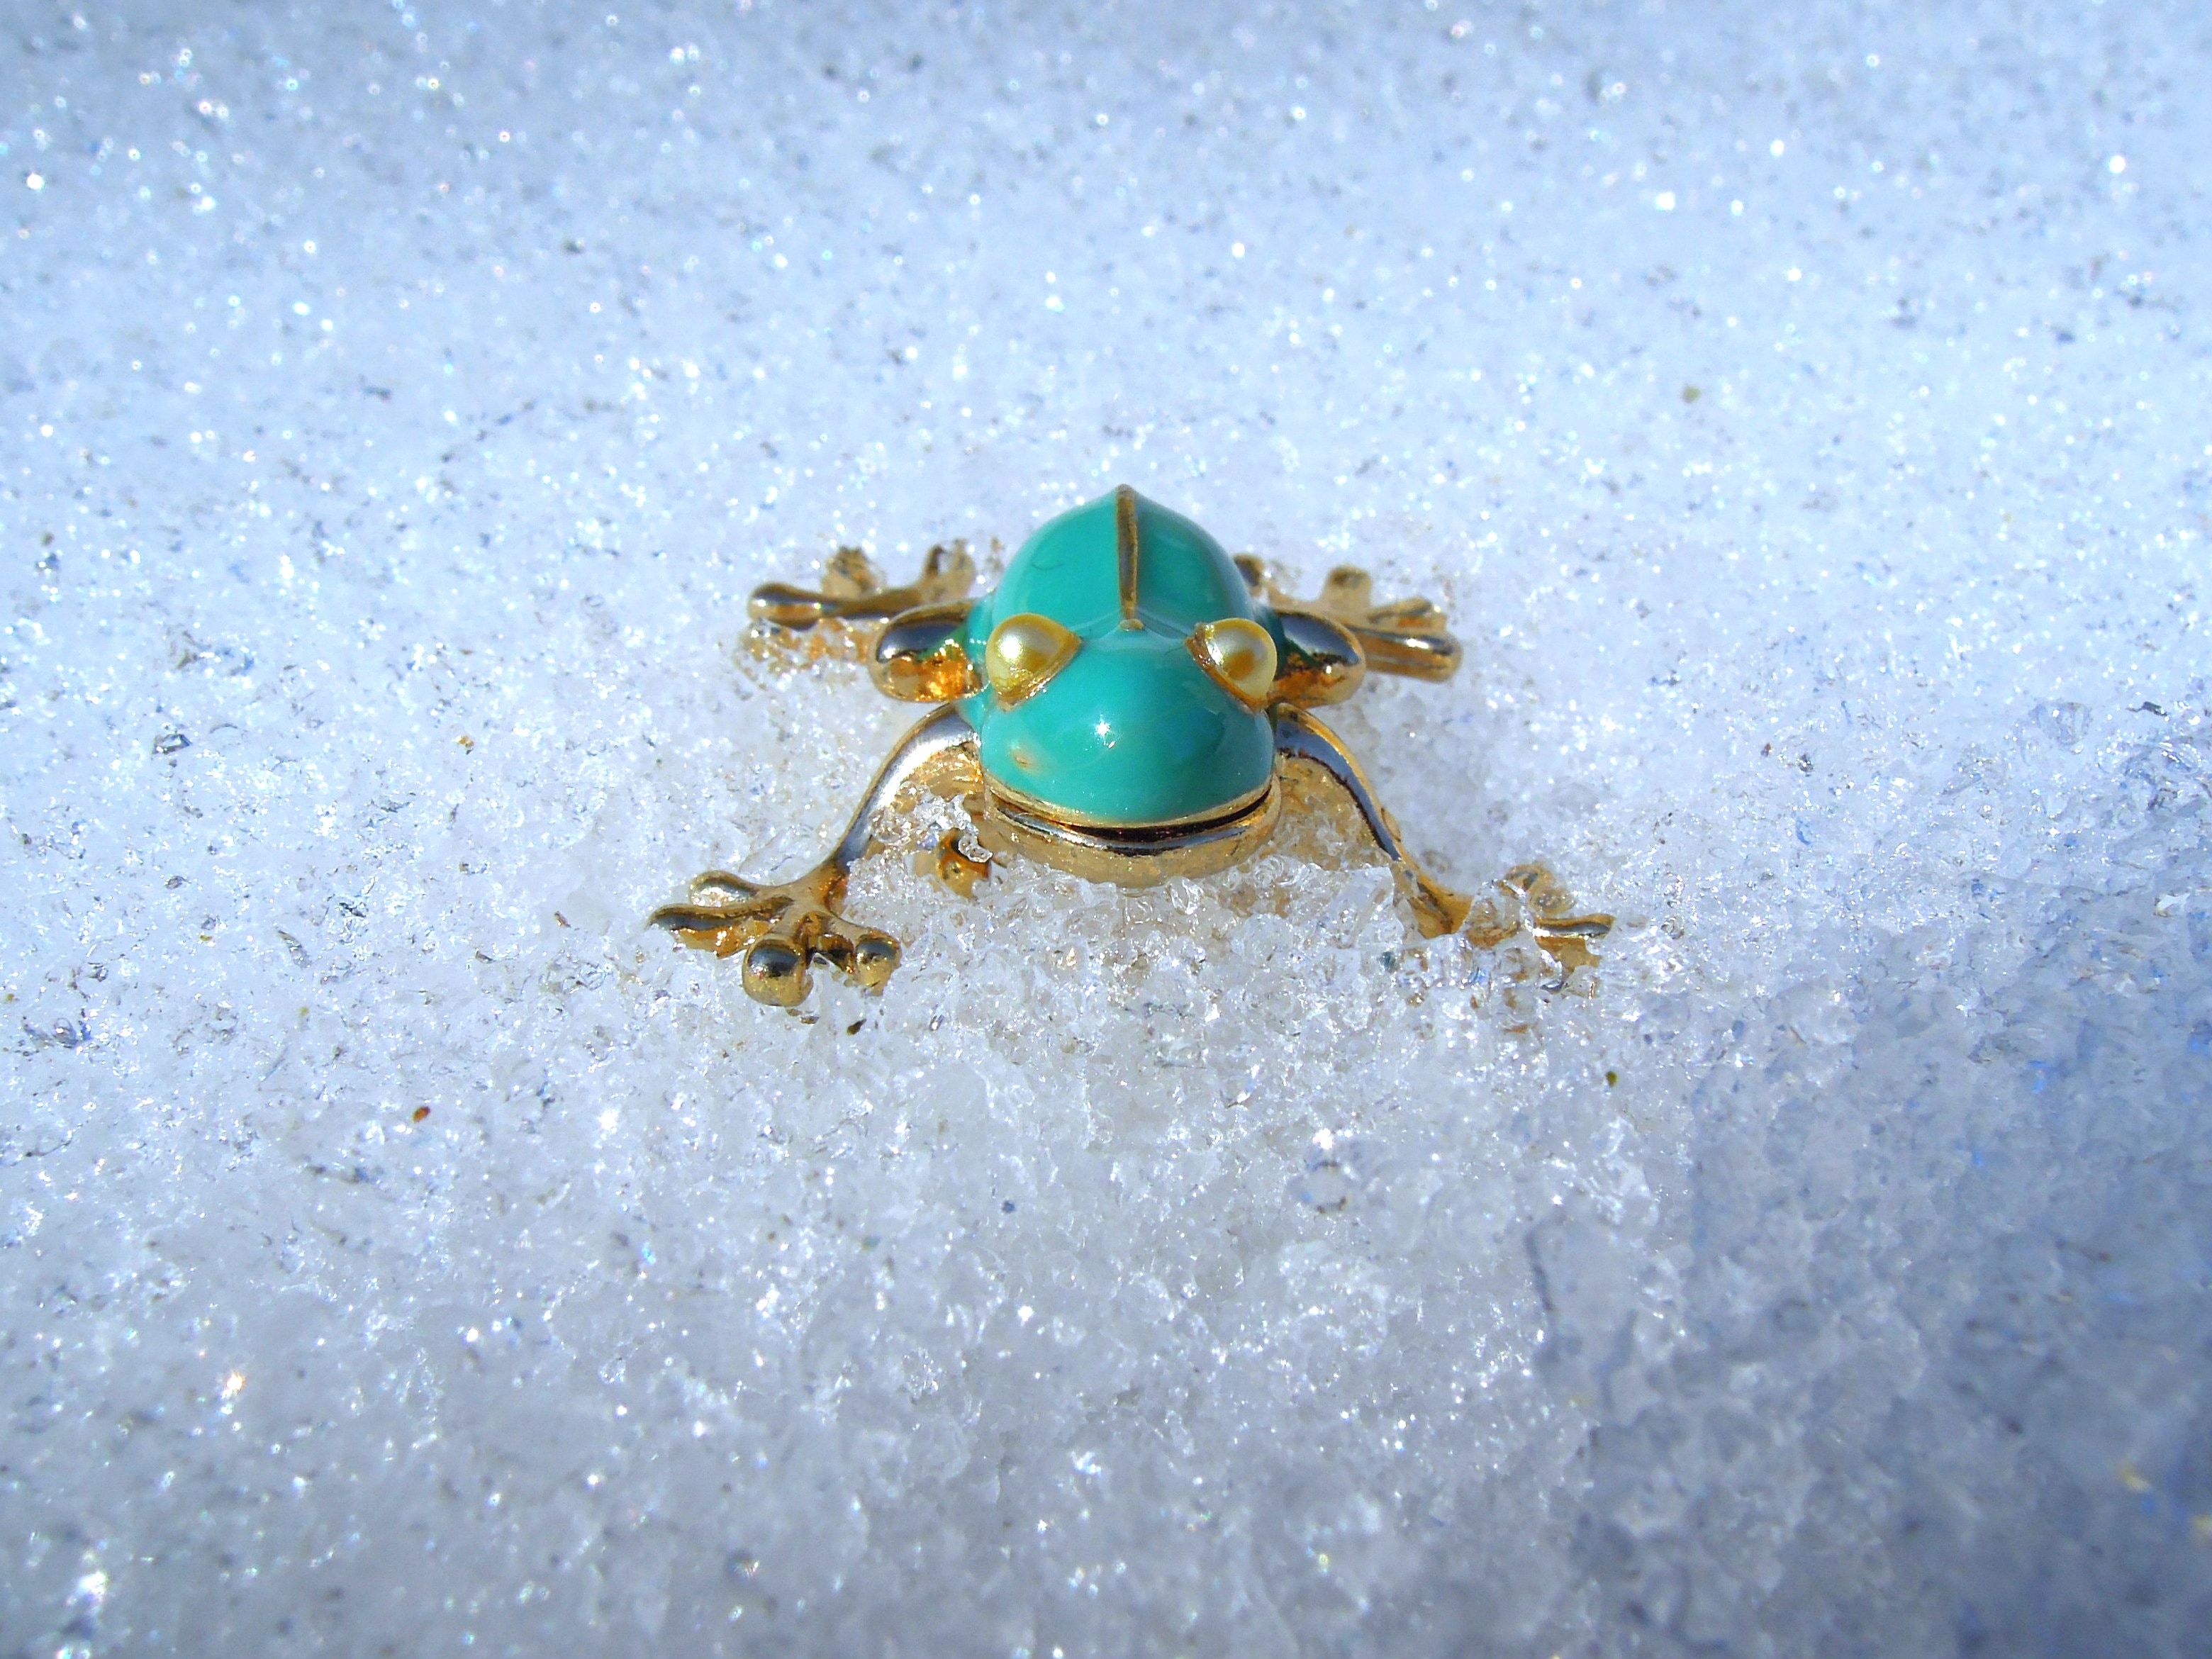 teal and gold frog decor on top of glass surface